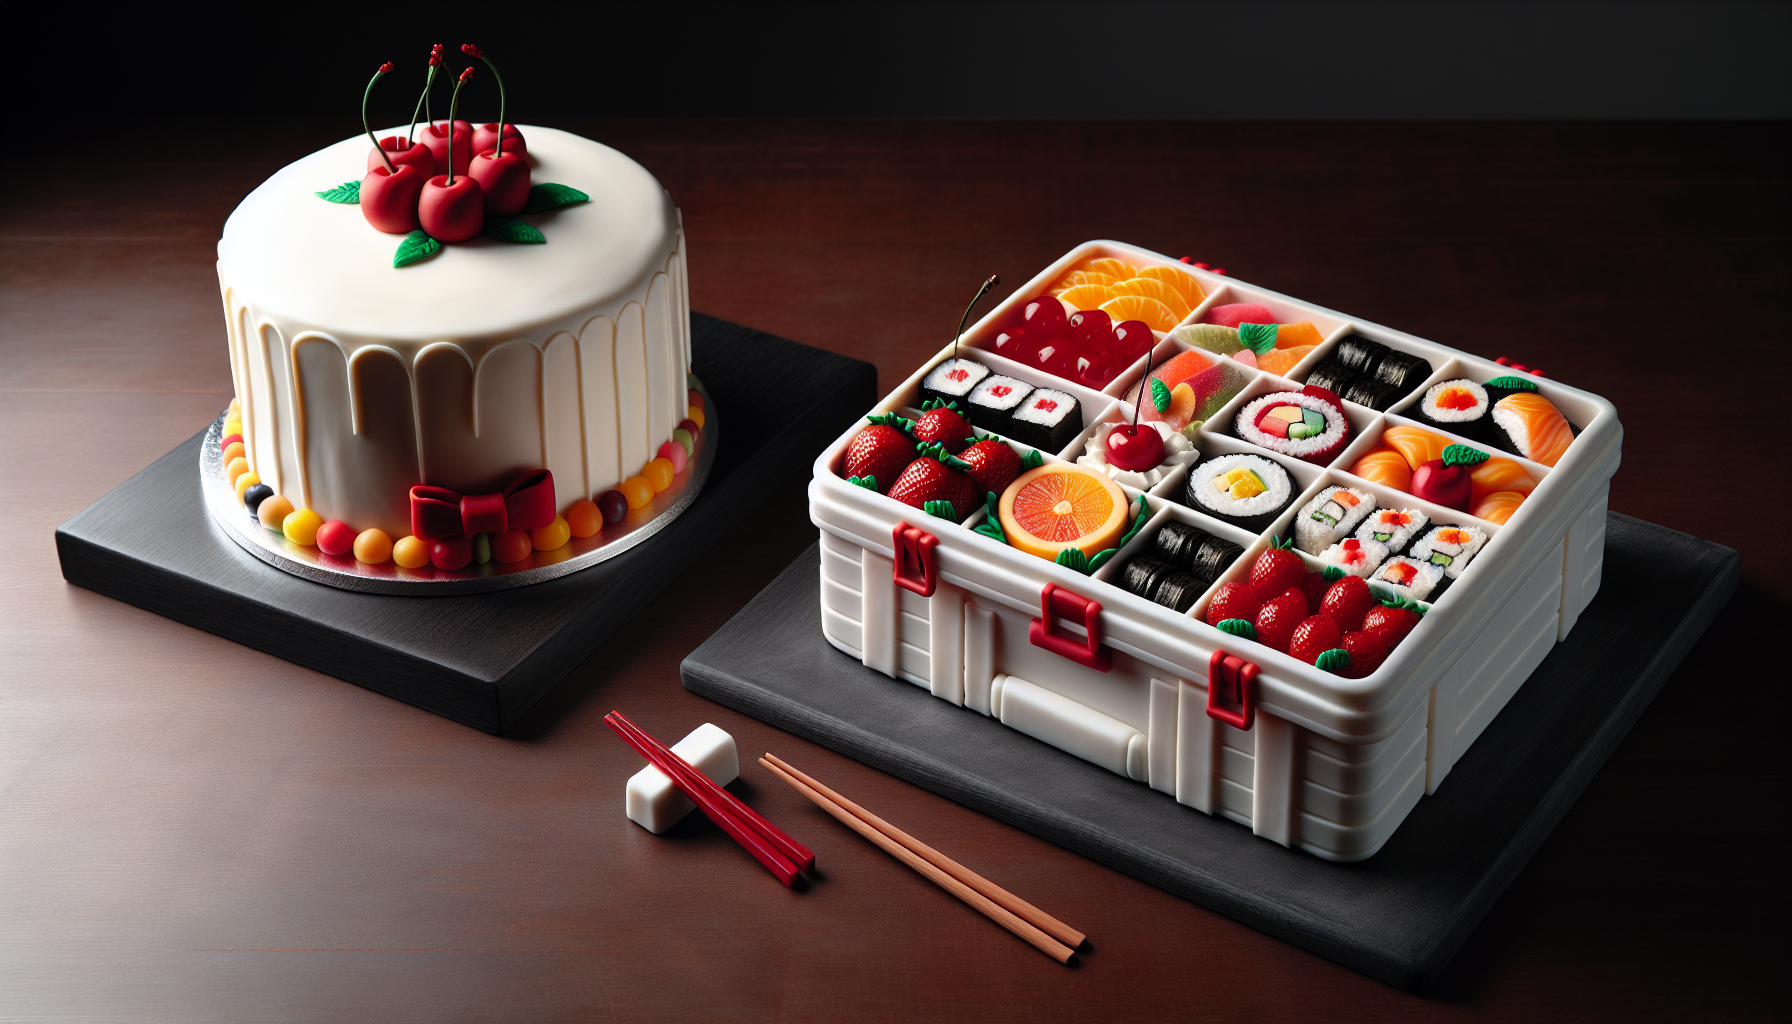 Comparison between bento cake and traditional cake